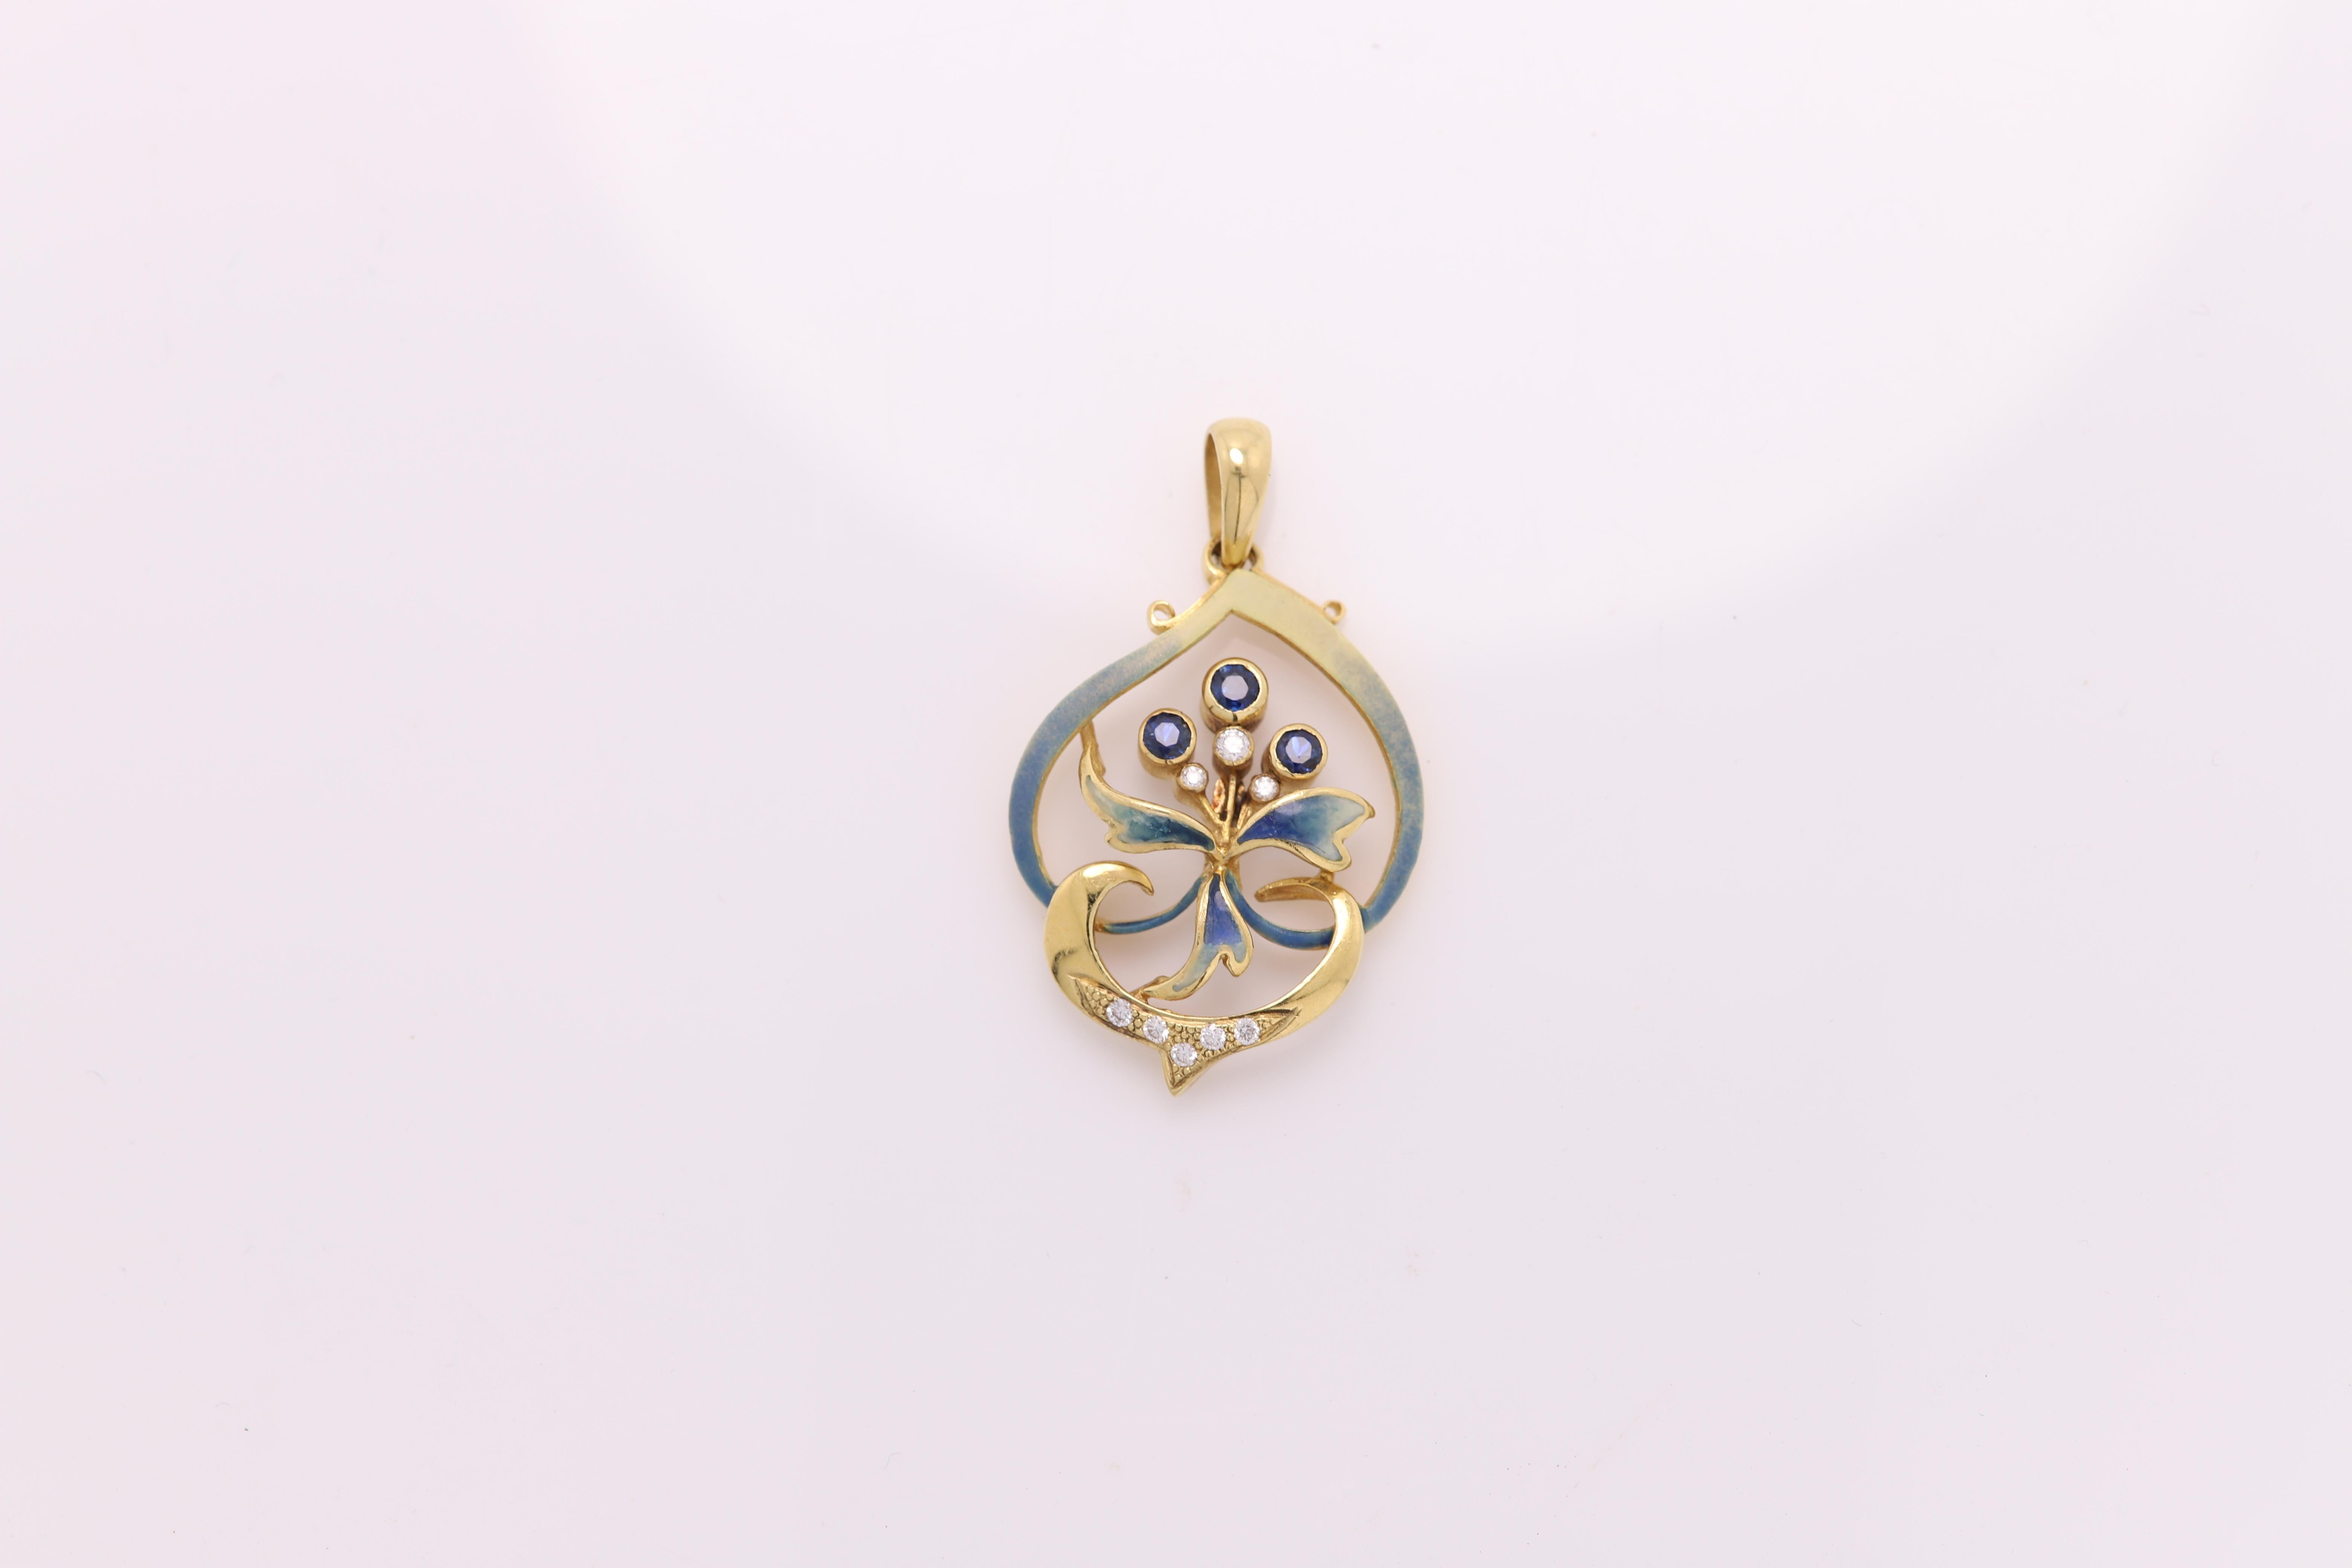 Vintage Hand made in Spain Enamel pendant
18K Yellow Gold 
approx size 1.25'  inch (30mm)
has few Diamonds  0.15 carat
and 3 blue sapphires 0.30 carat
Weight 6.7 grams
Style is based from the period of Nouveau era
made approx.  20+ years ago
Overall